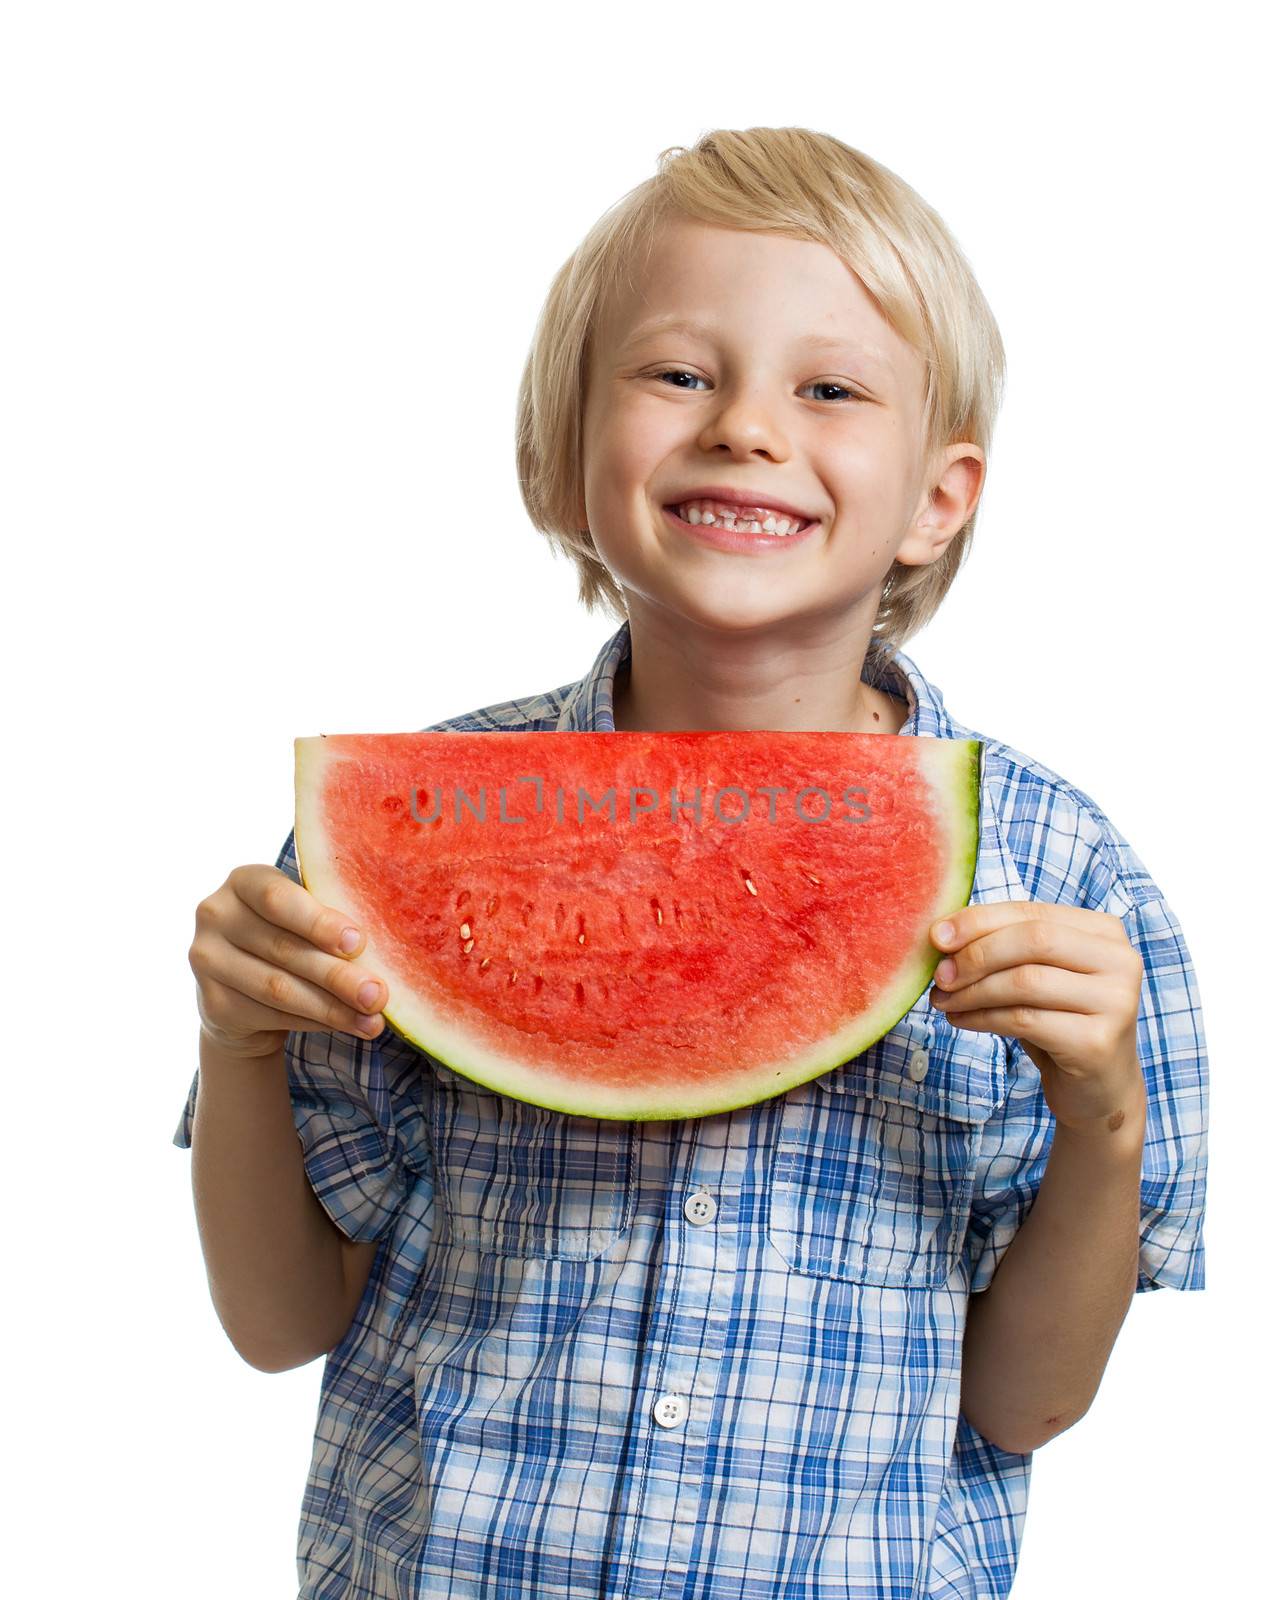 A cute happy blond boy holding a big juicy slice of watermelon. Isolated on white.